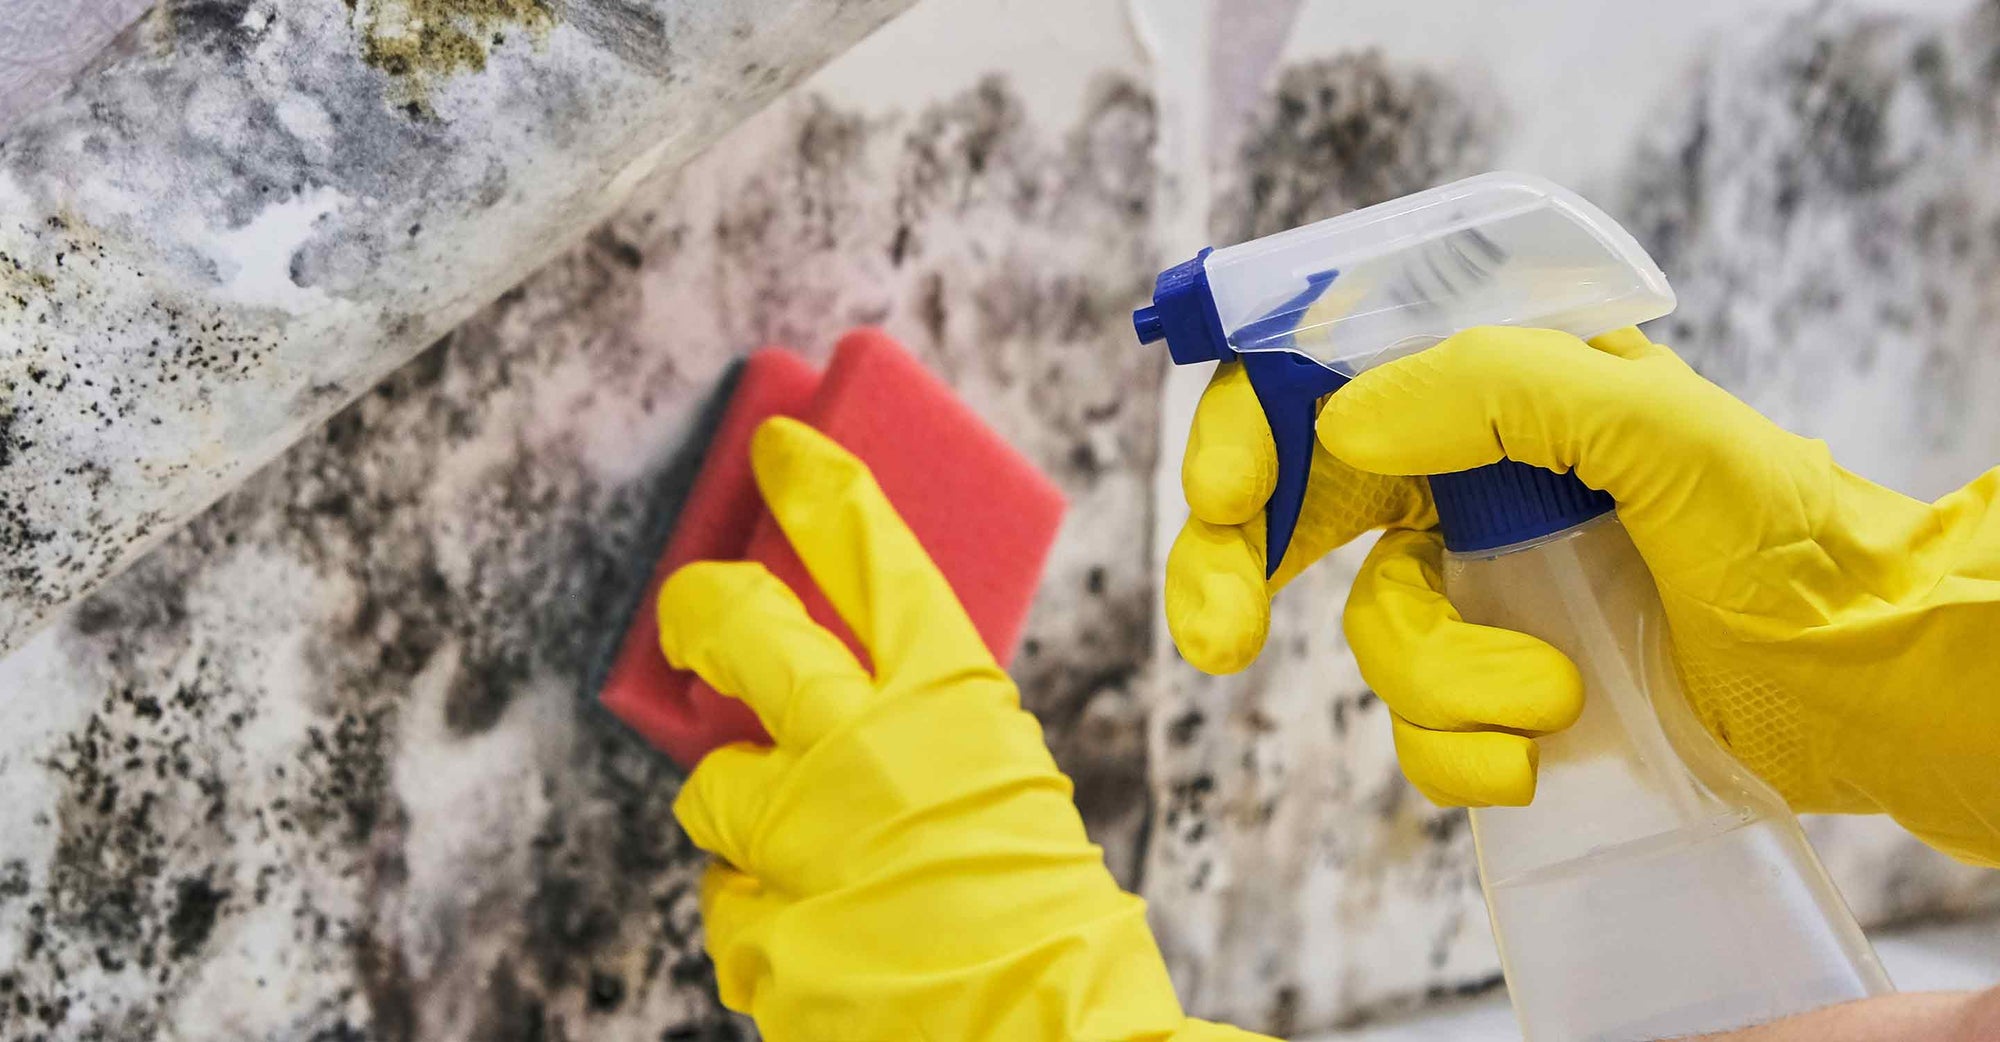 Cleaning gloves cleaning mold off of walls